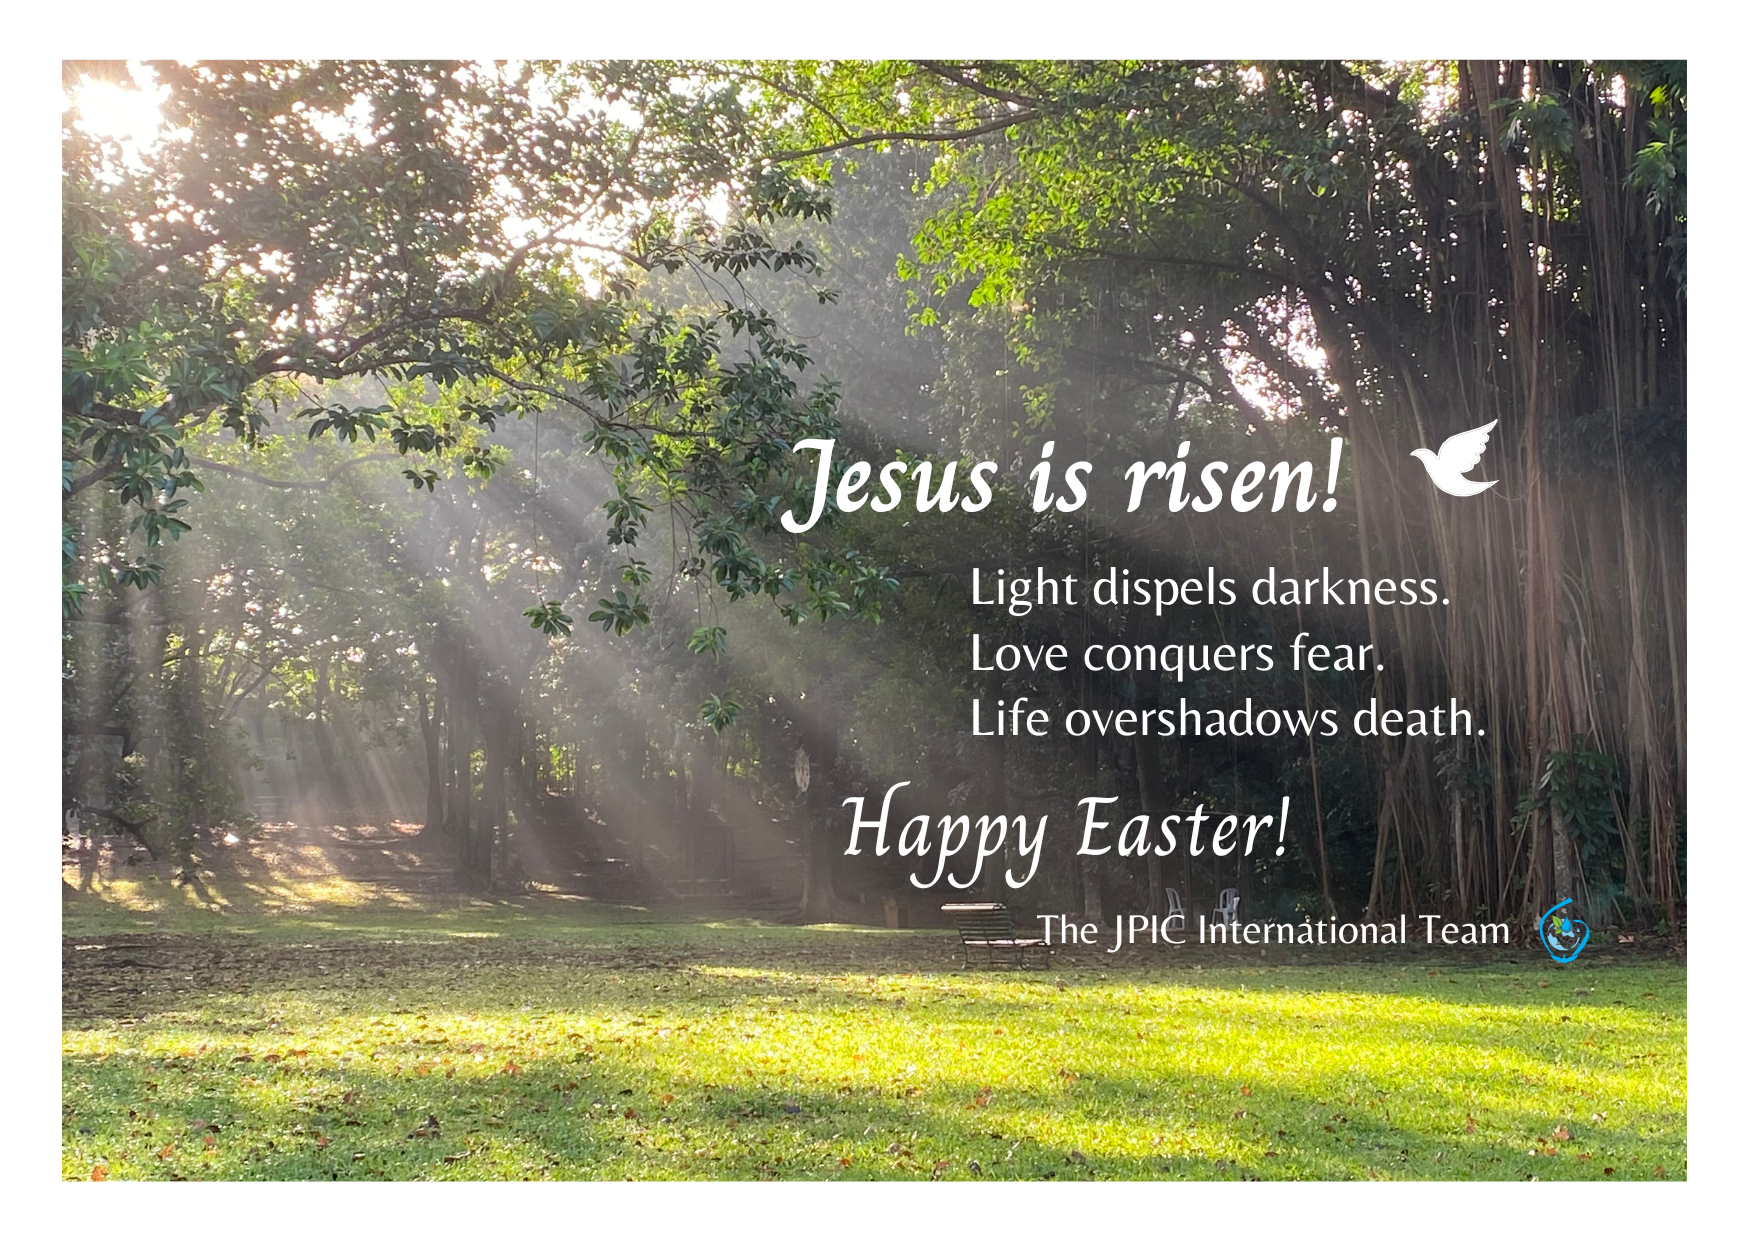 Easter greetings from JPIC 